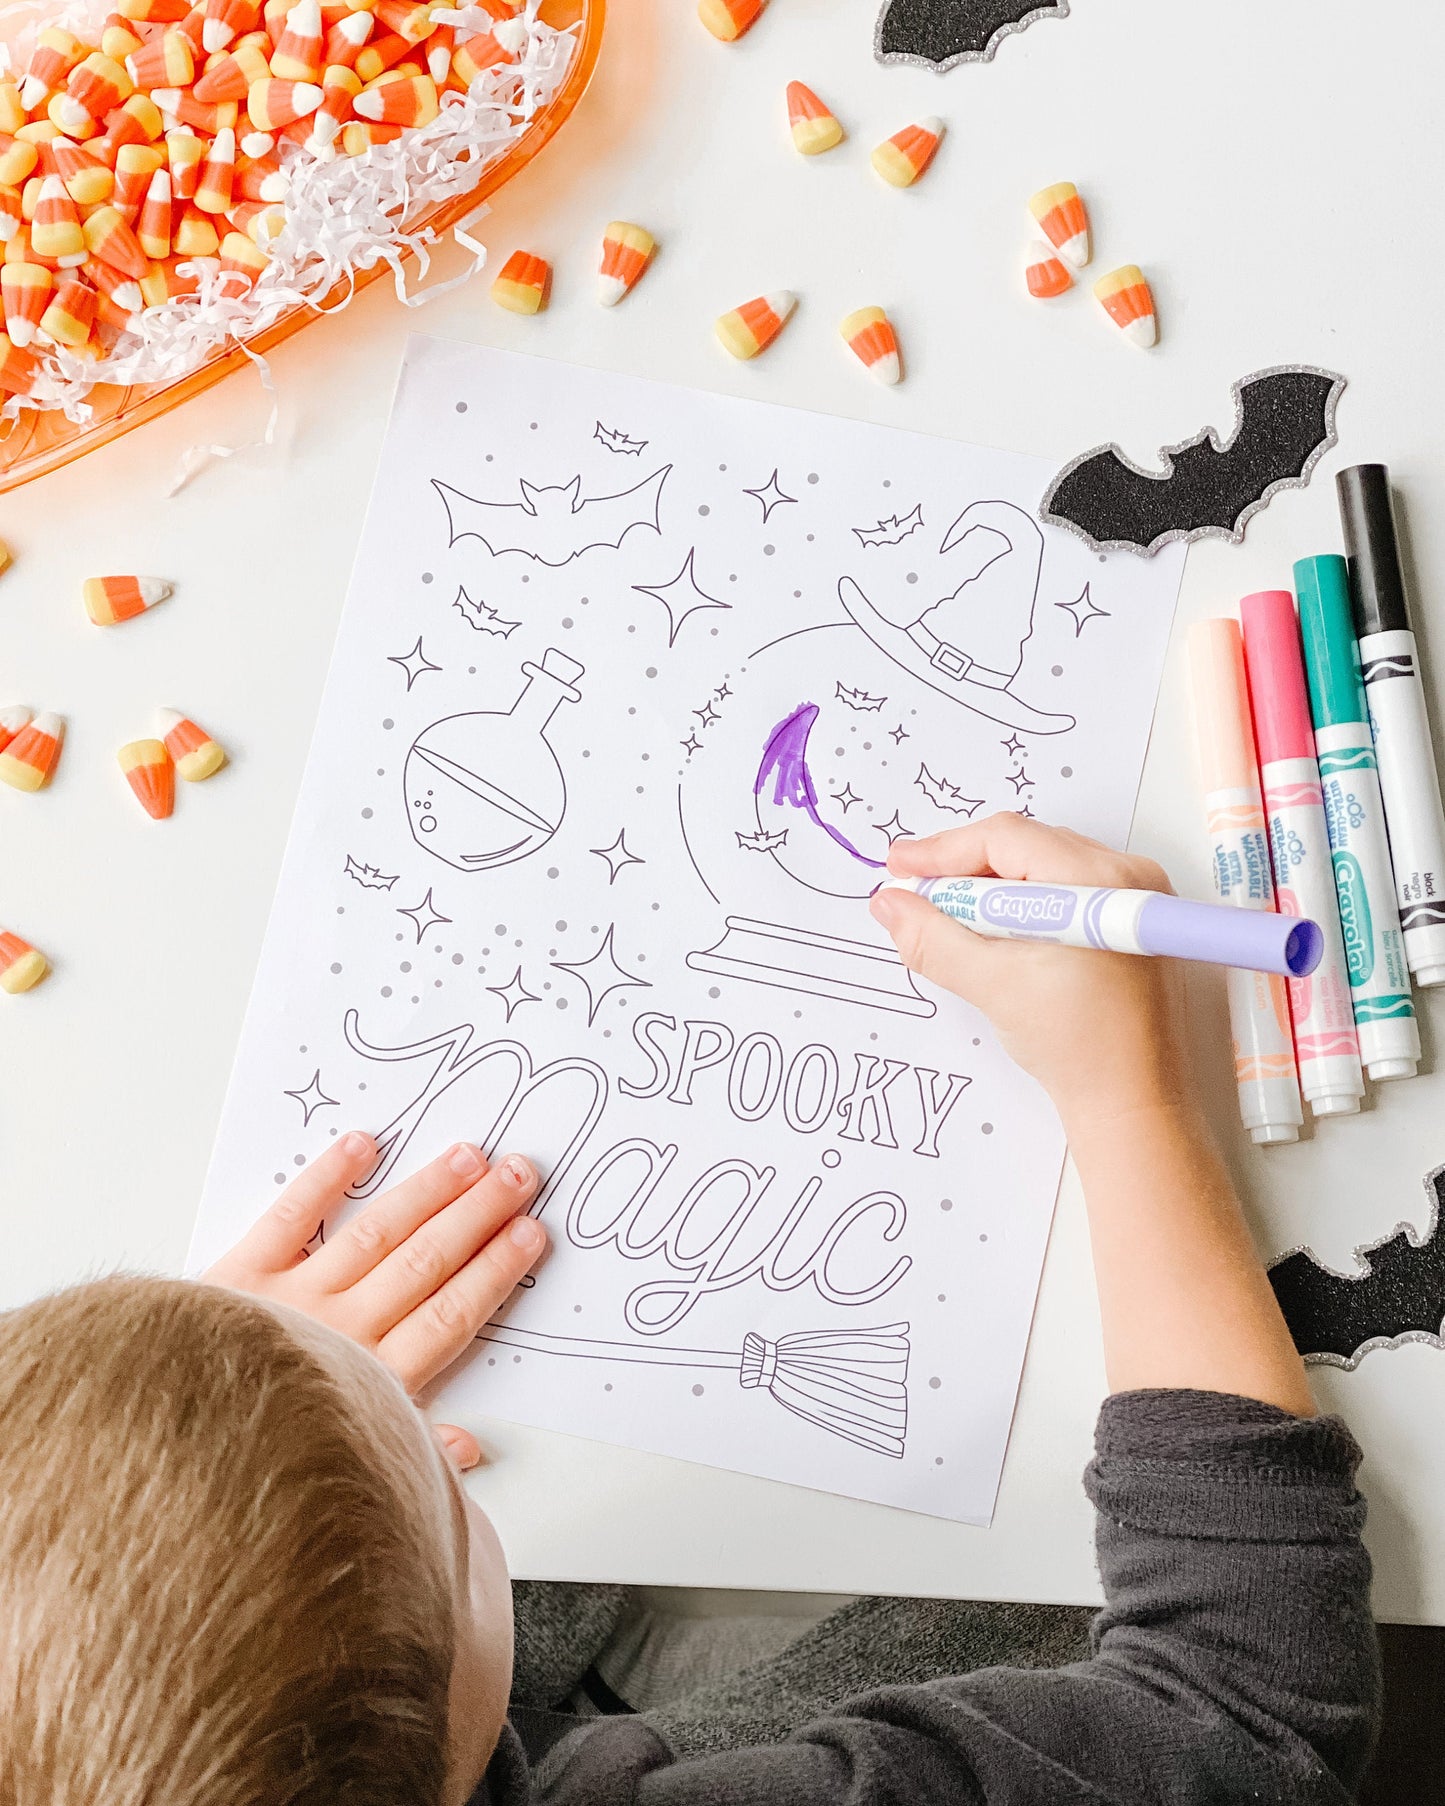 Spooky Magic Halloween Party Pack || Printable Halloween Party Kit || DIY Halloween Activities & Decor || Kids Halloween Party Decor || H02